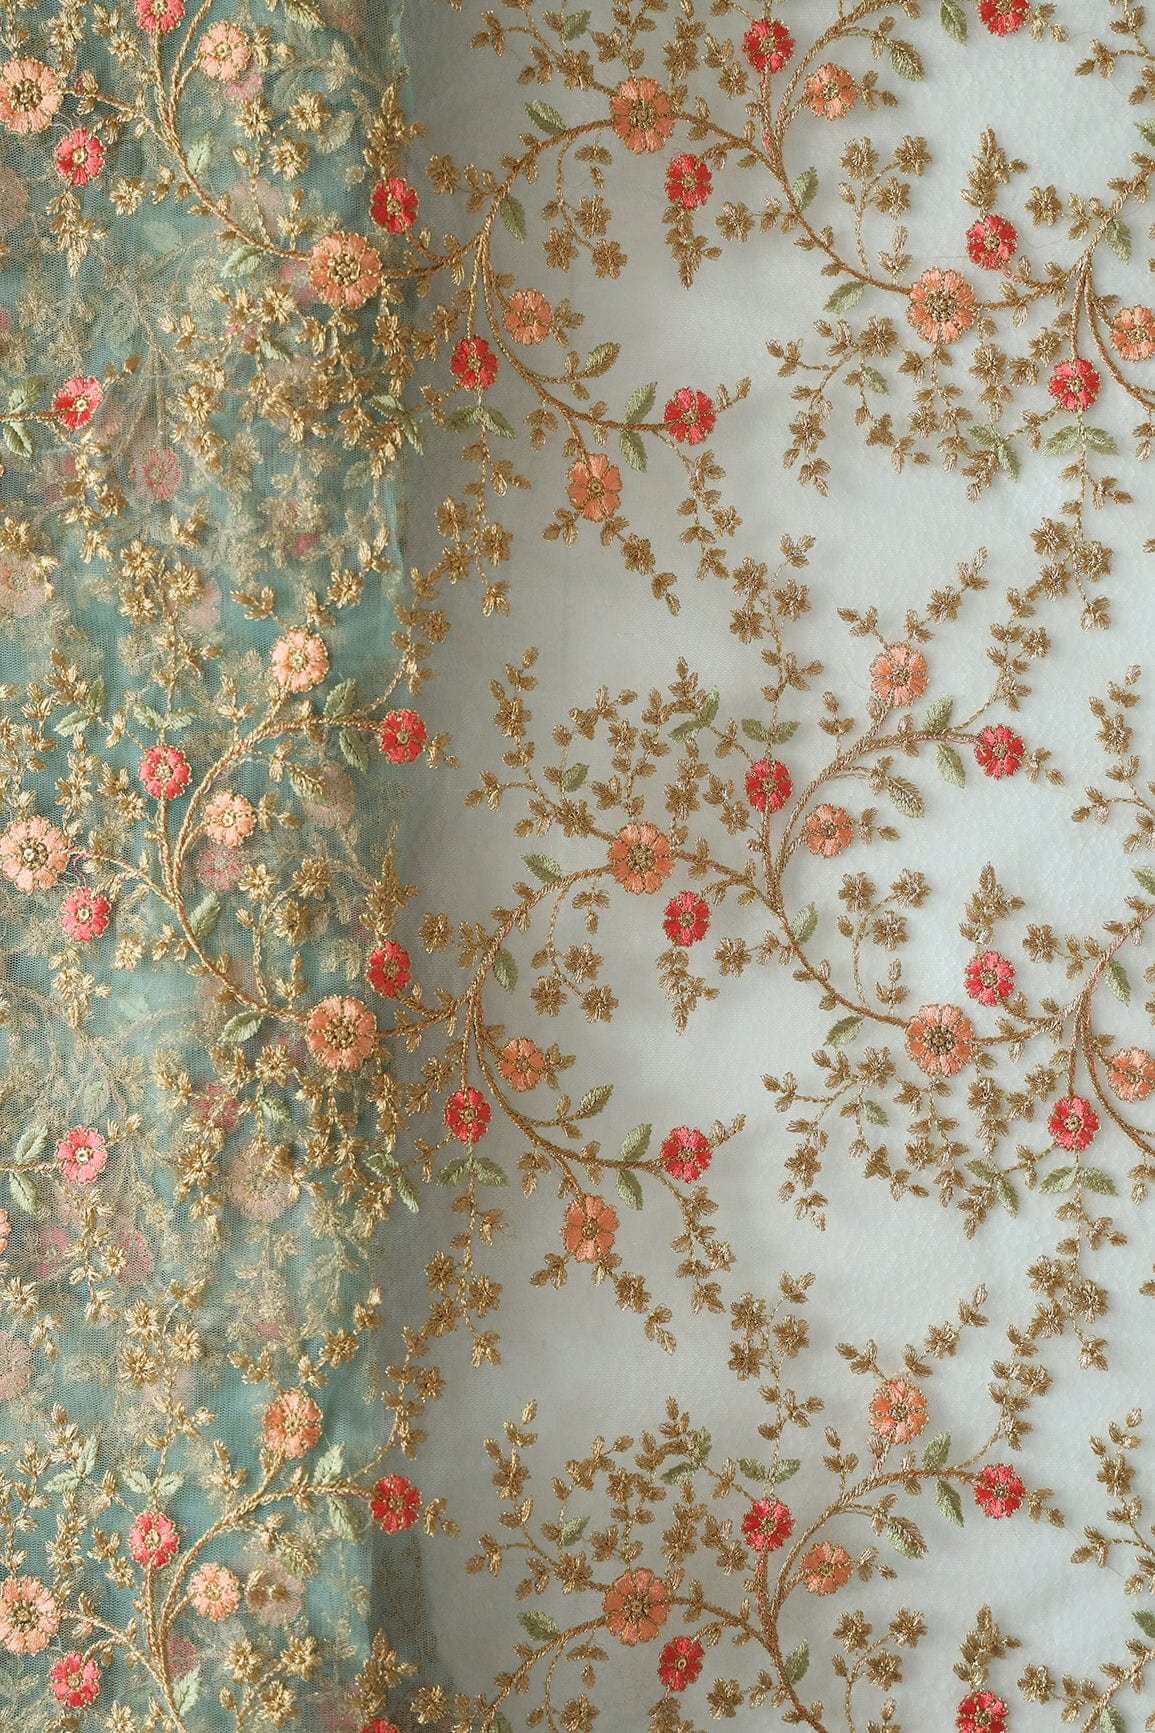 doeraa Embroidery Fabrics Red And Peach Thread With Gold Zari Floral Embroidery Work On Light Teal Soft Net Fabric